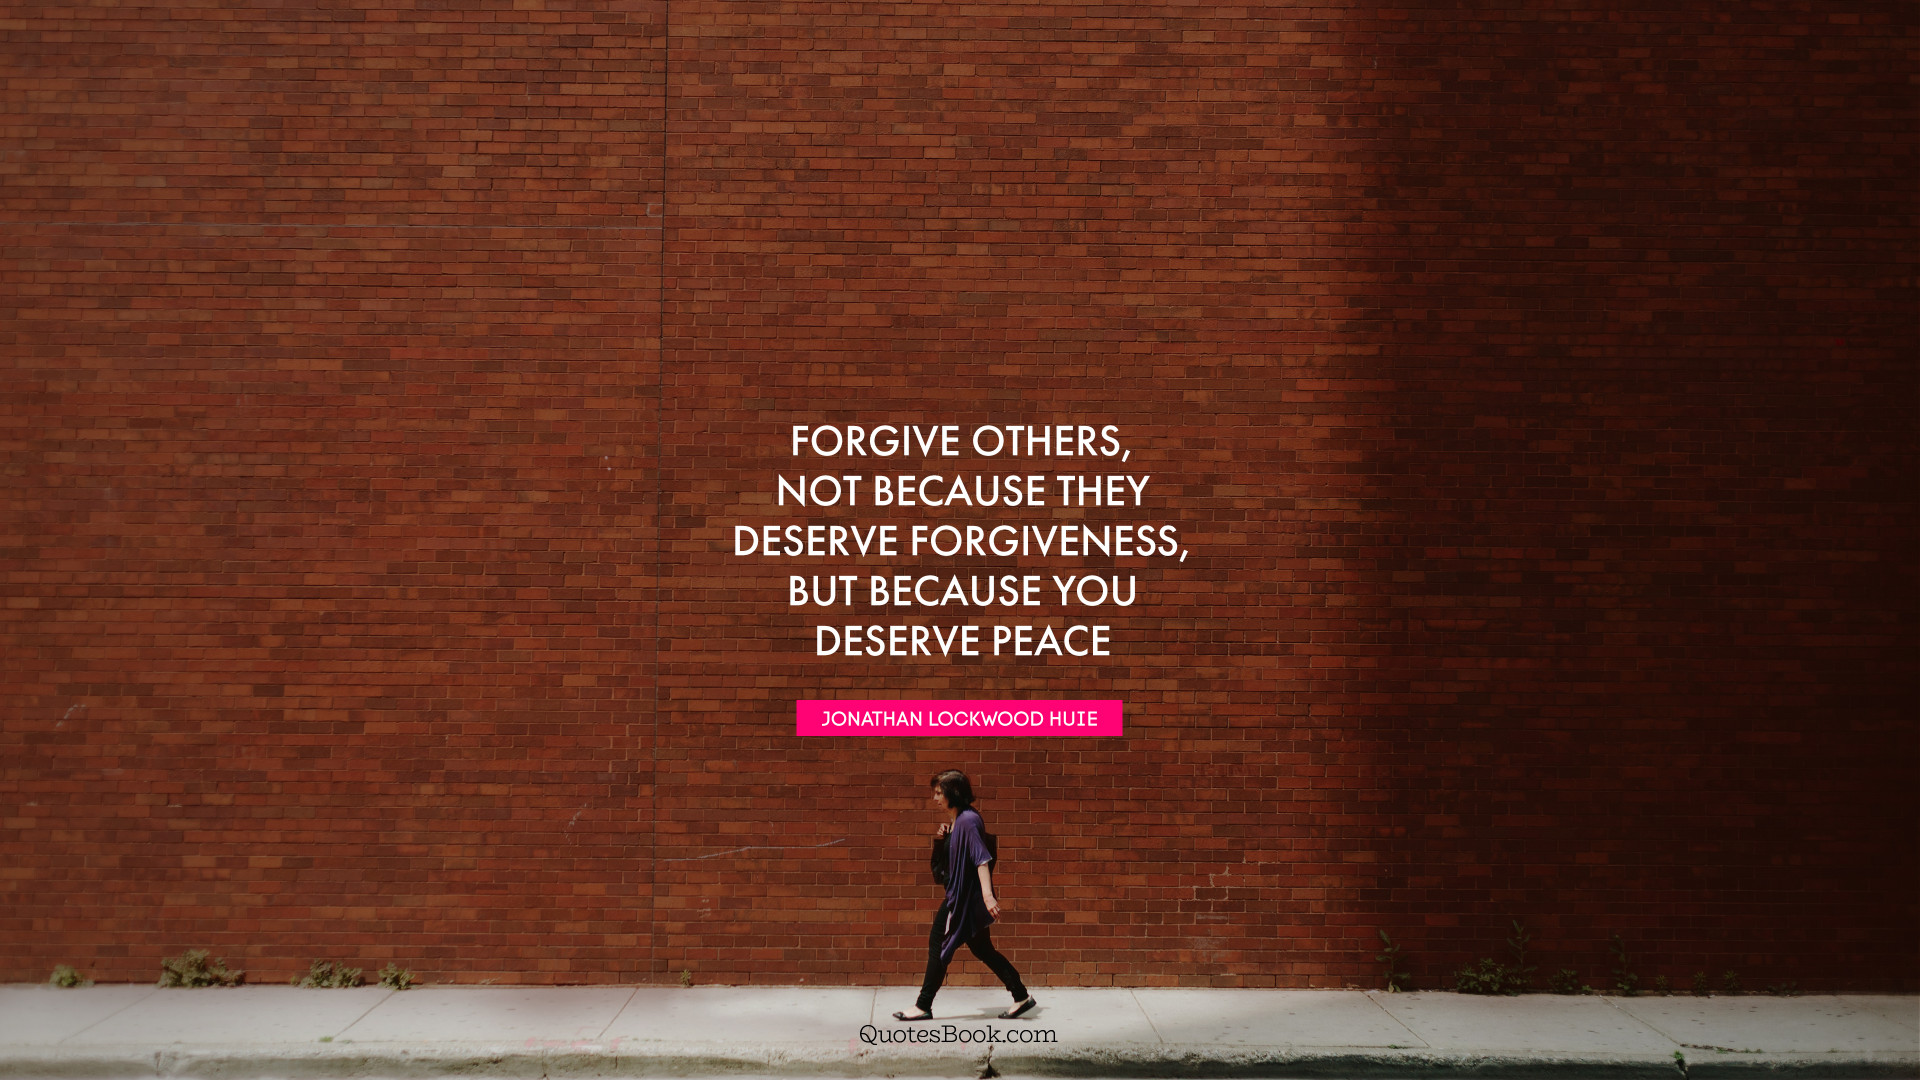 Forgive others, not because they deserve forgiveness, but because you